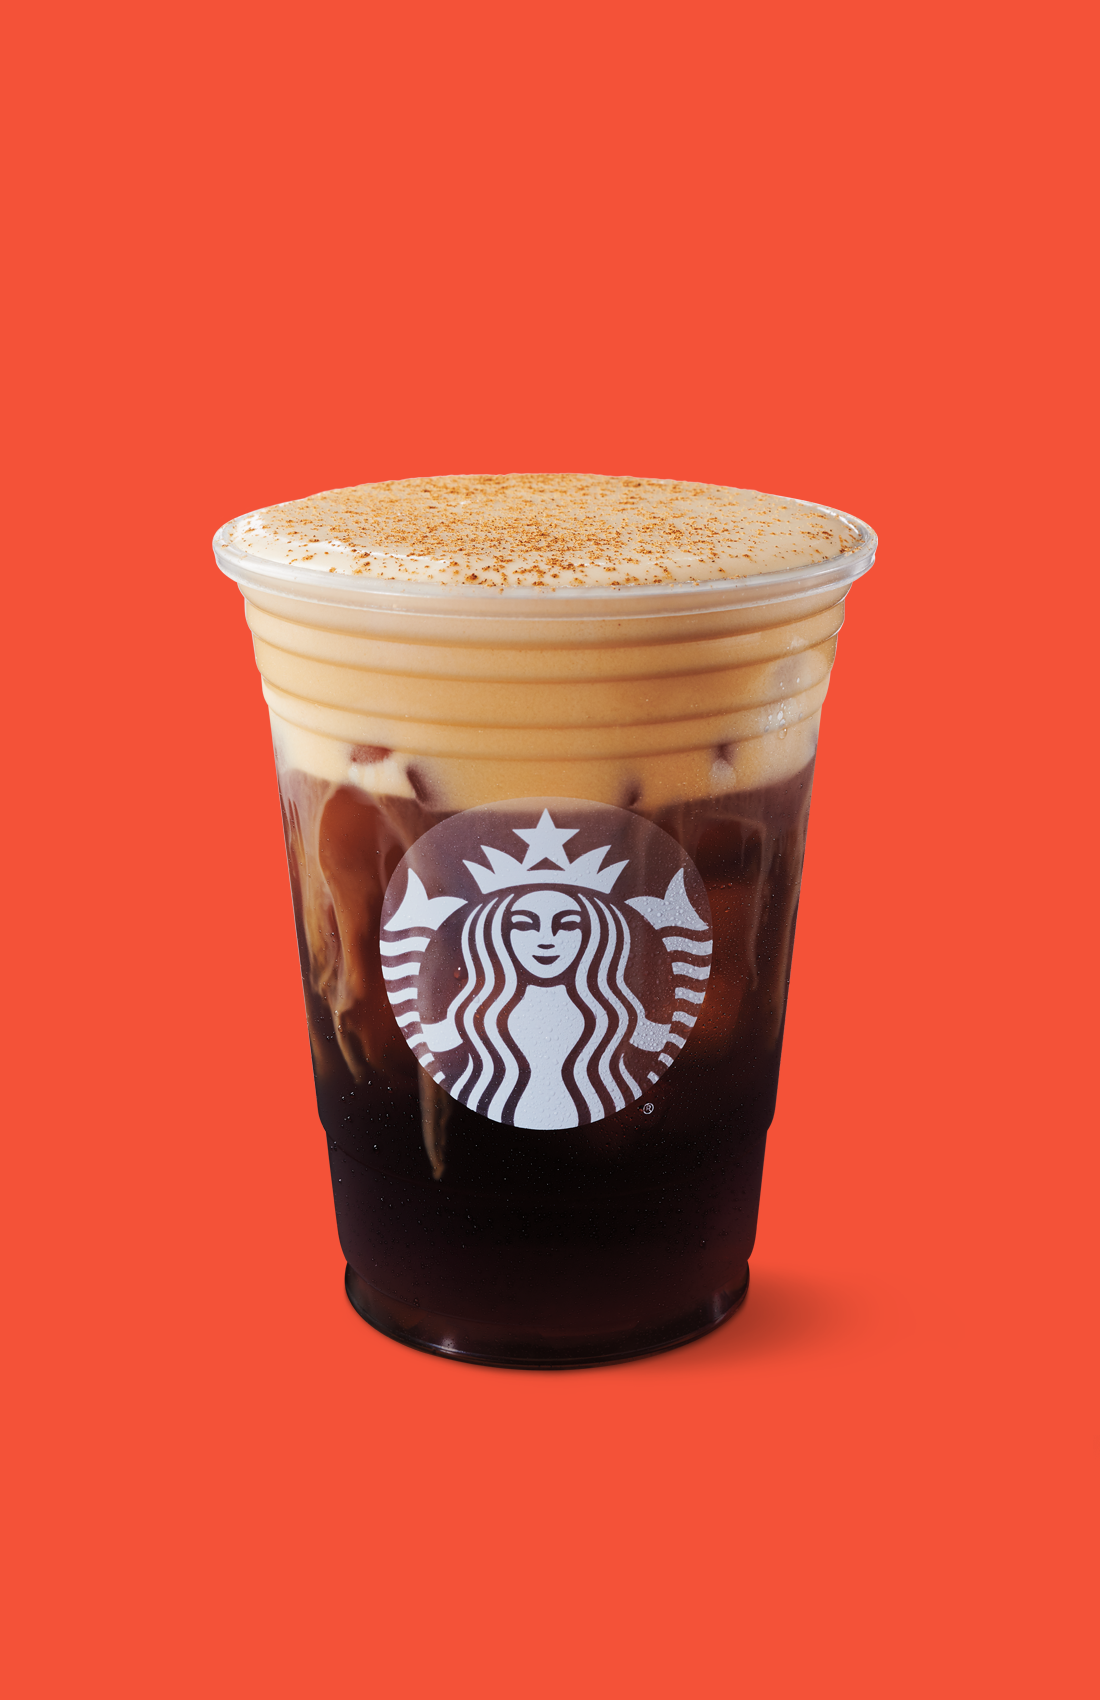 New drink and PSL arrive Aug. 27